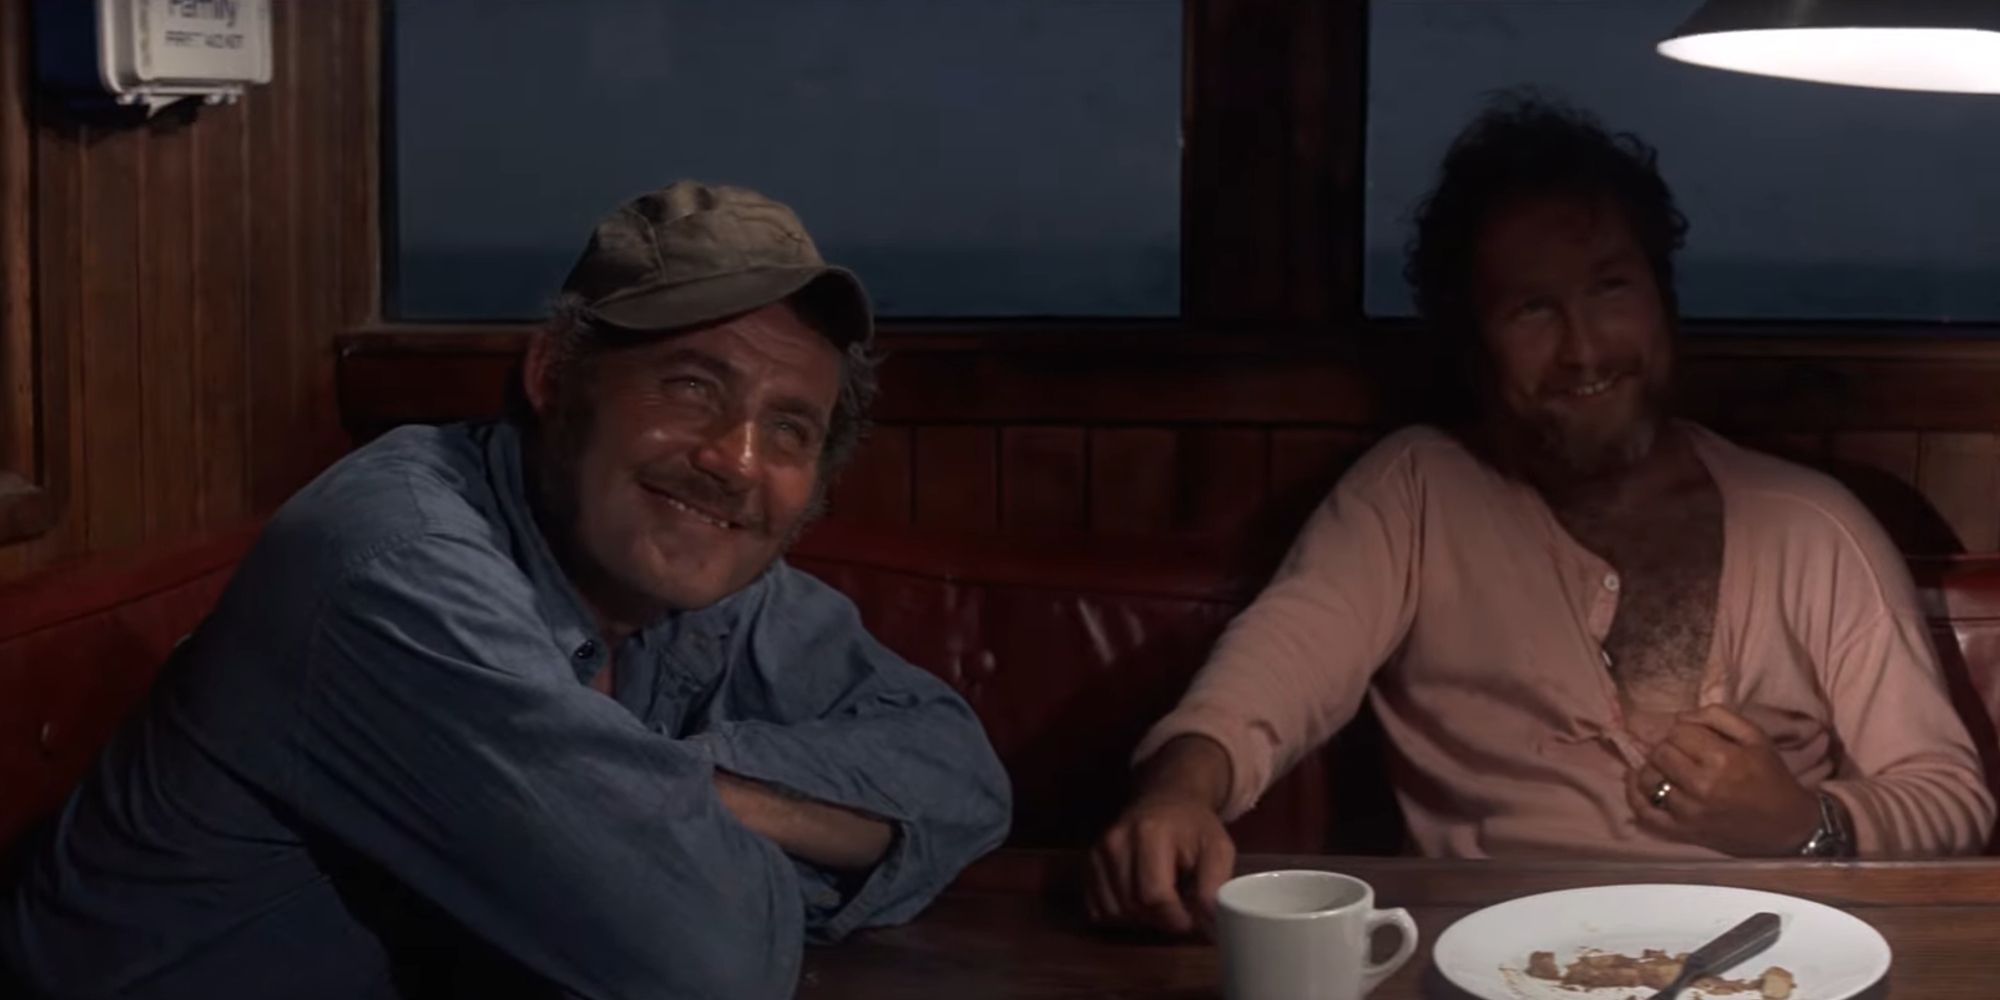 Matt Hooper and Quint laughing aboard the Orca in Jaws